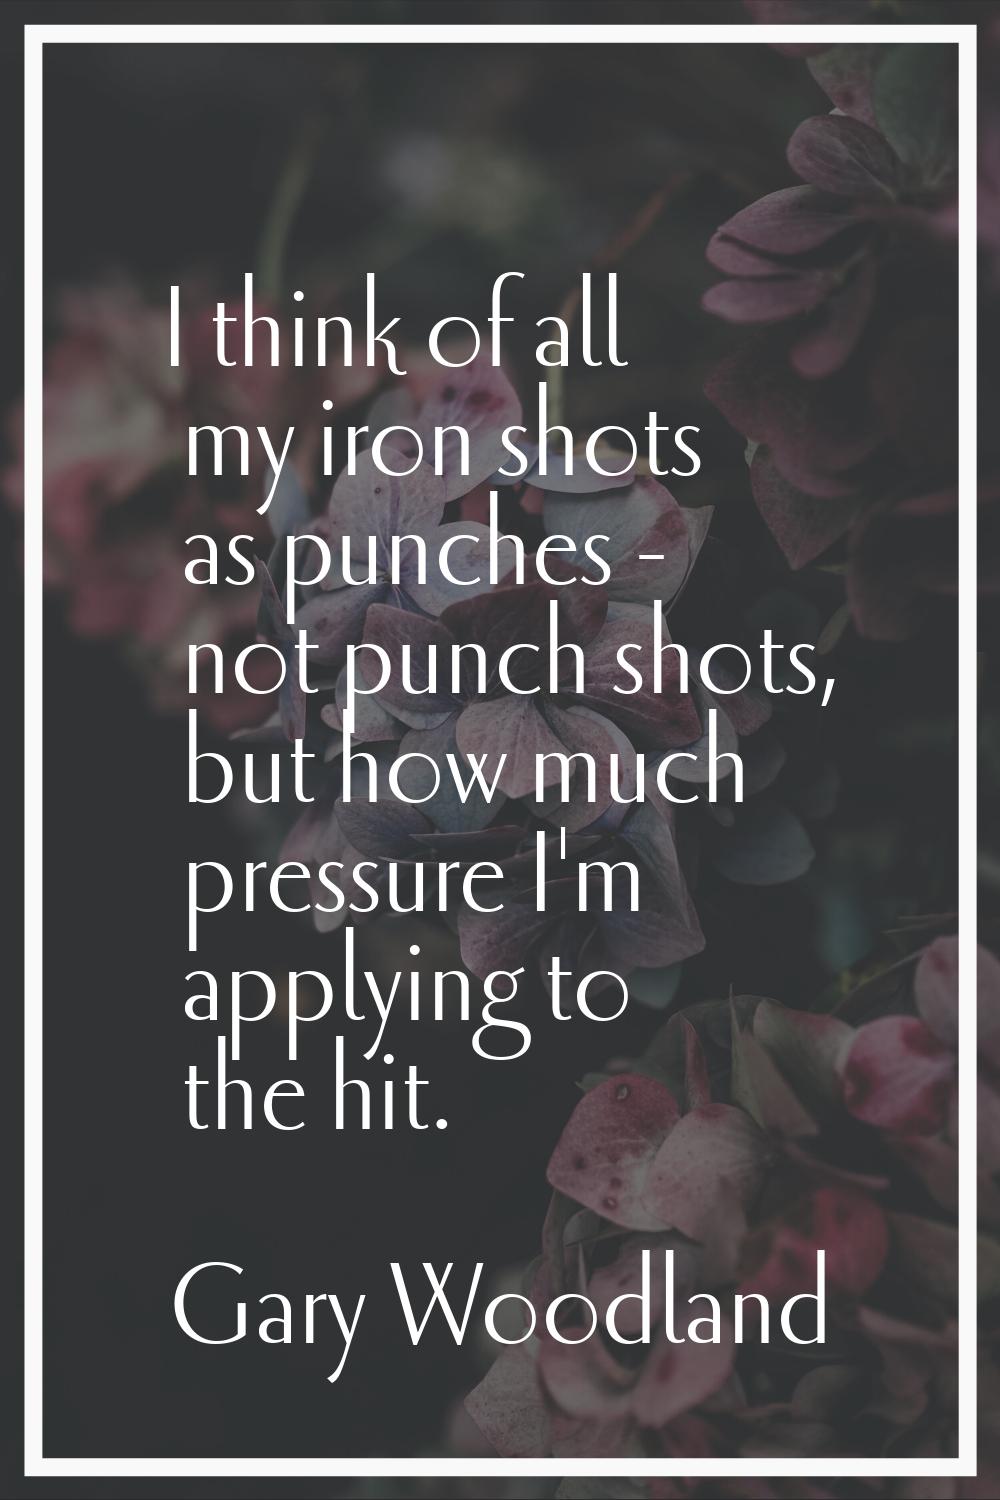 I think of all my iron shots as punches - not punch shots, but how much pressure I'm applying to th